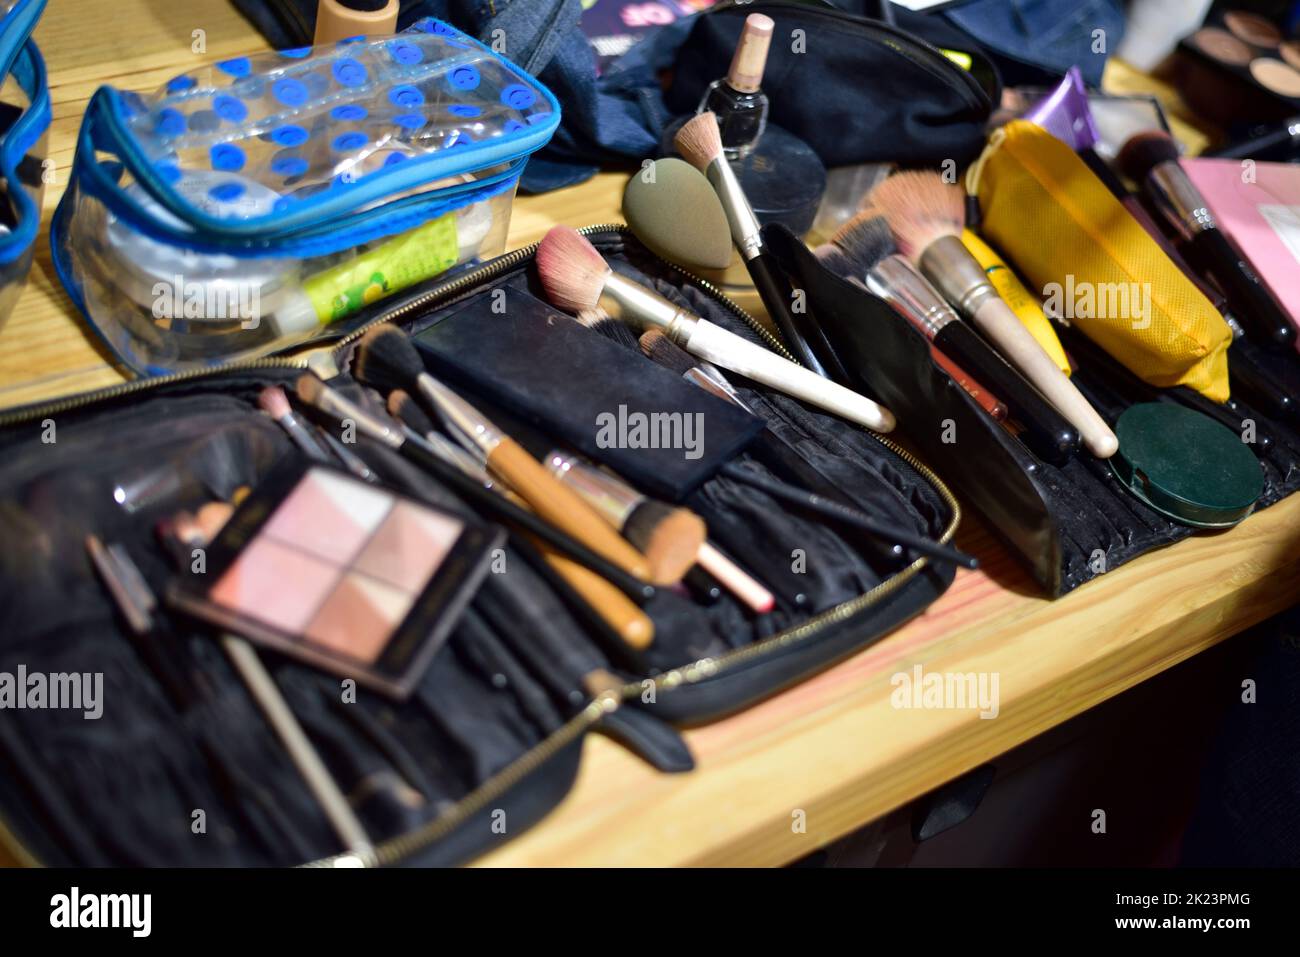 Makeup kits laying down on table haphazardly Stock Photo